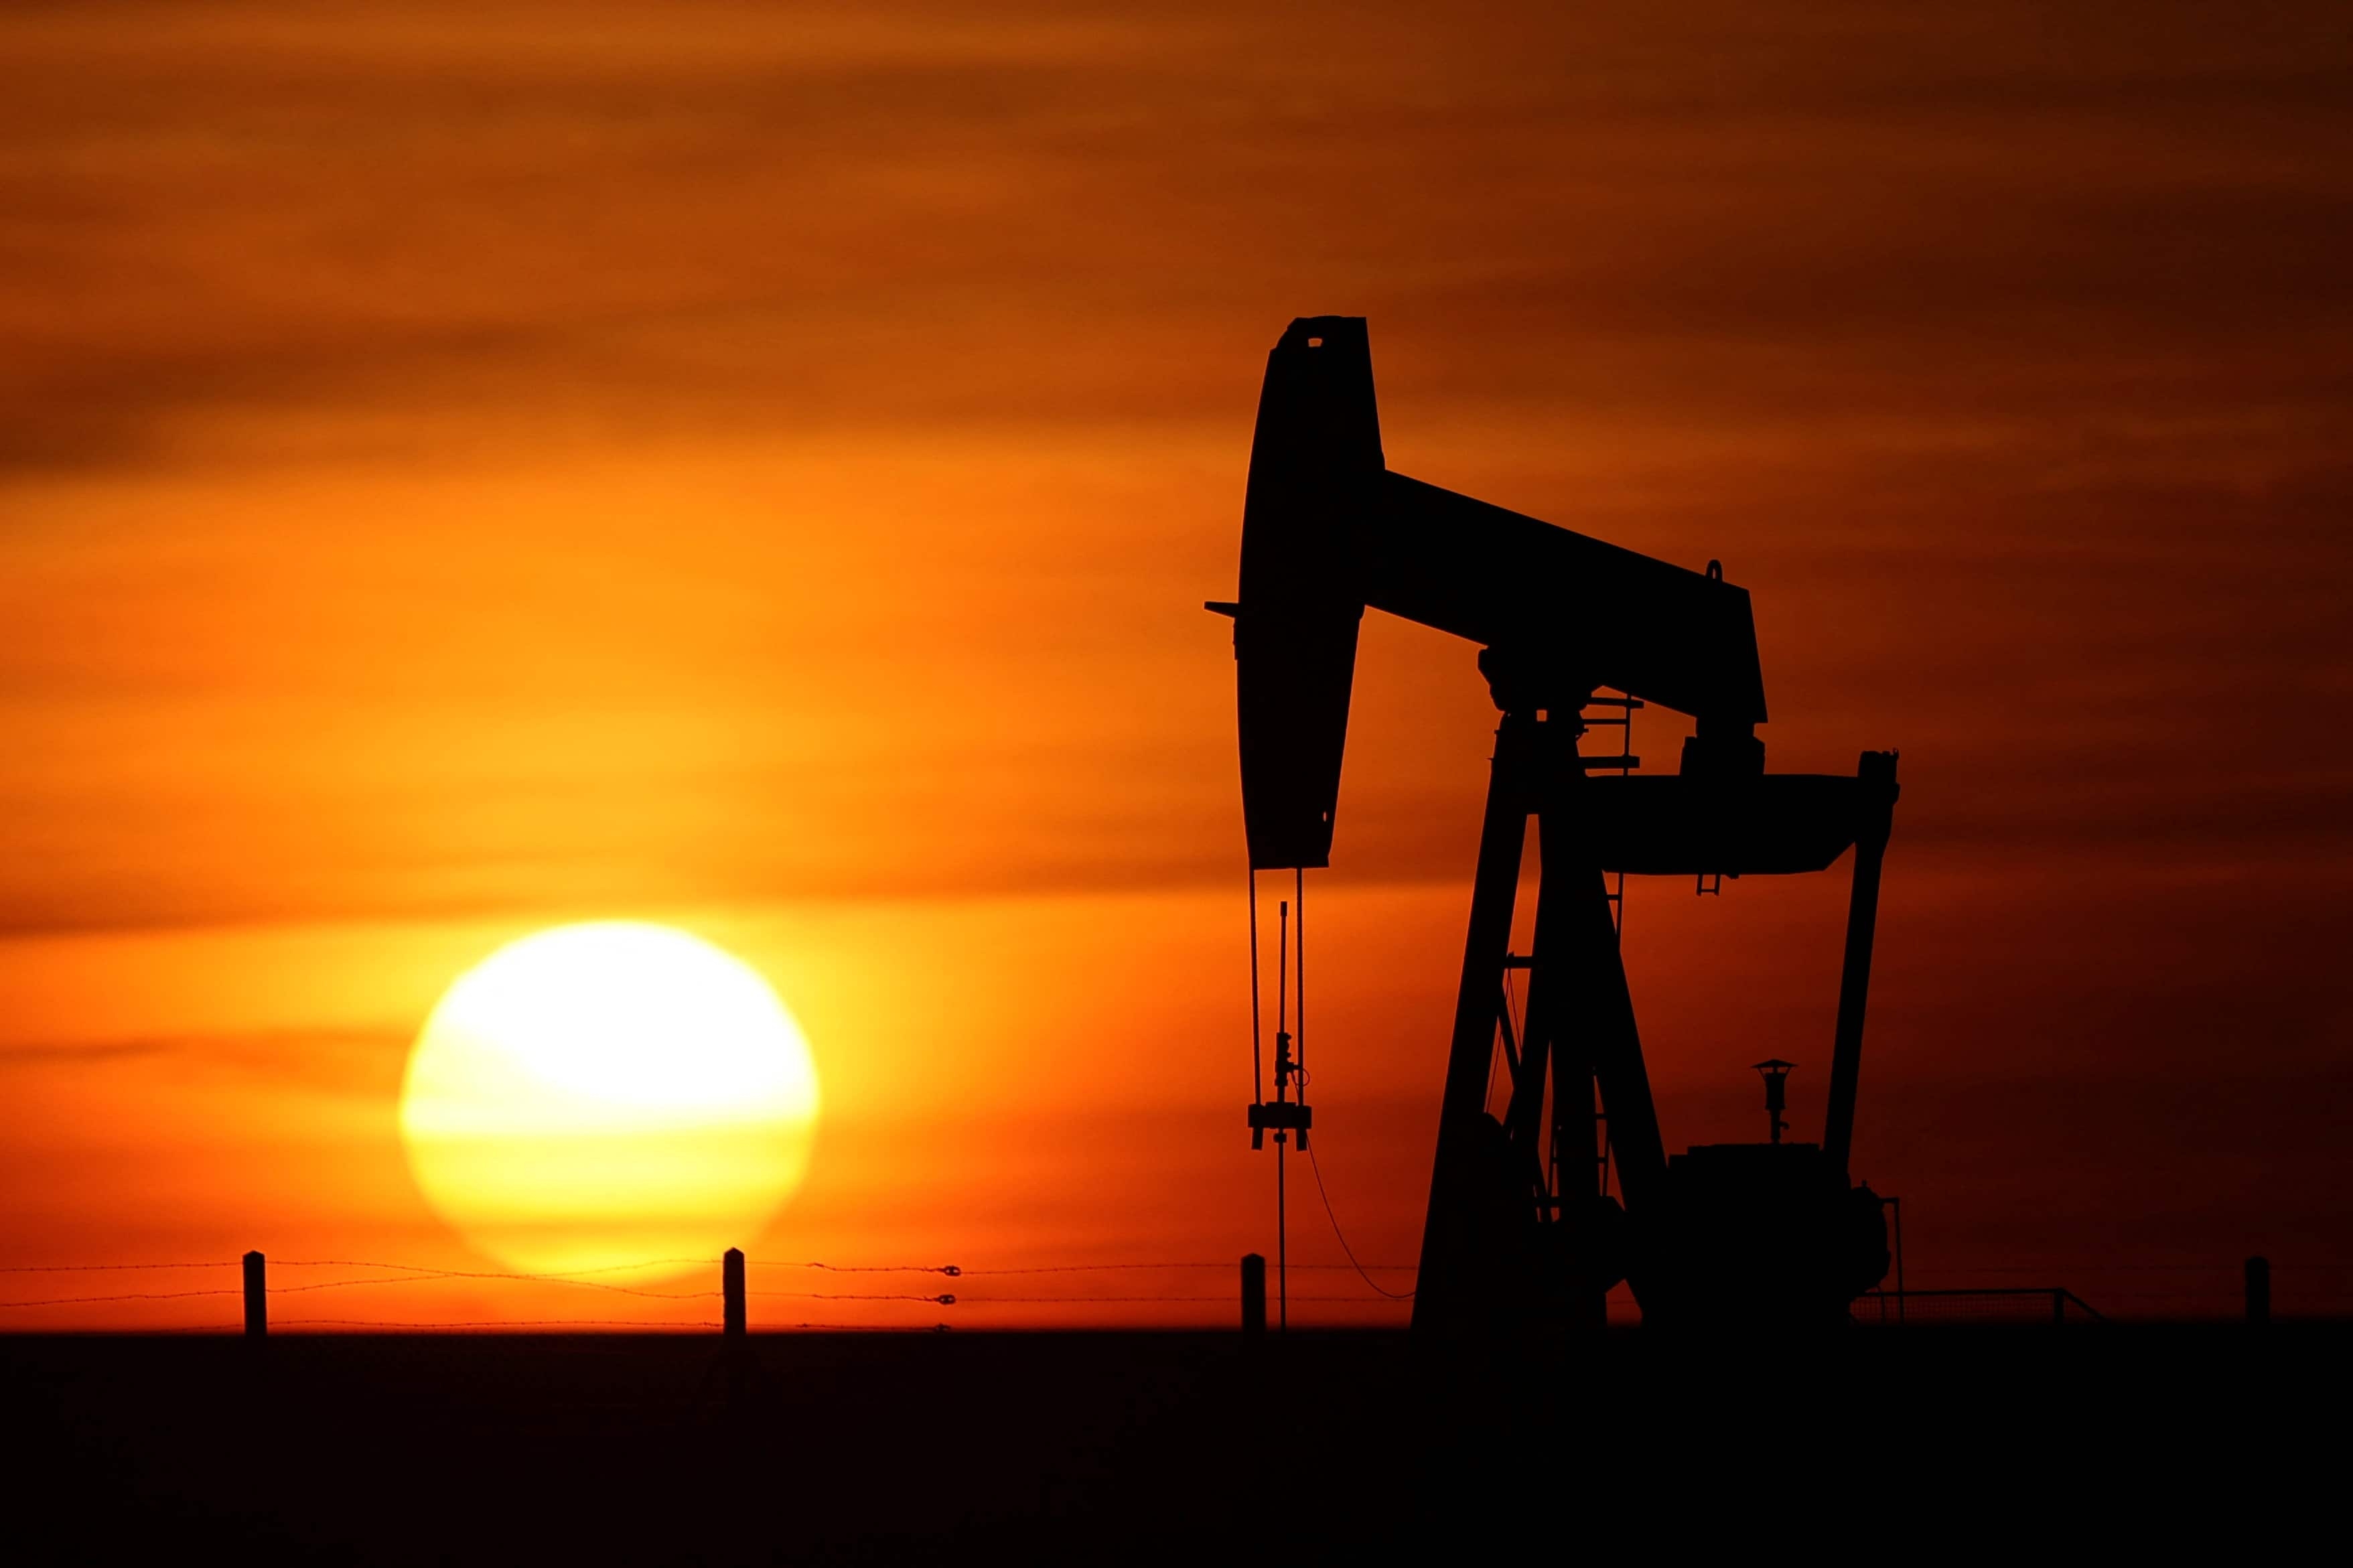 Oil prices soared to their highest since 2008 due to delays in the potential return of Iranian crude to global markets and as the United States and European allies consider banning imports of Russian oil. Brent rose $11.67, or 9.9 percent, to $129.78 a barrel by 6:50 p.m. EST (2350 GMT), while US West Texas Intermediate (WTI) crude rose $10.83, or 9.4 percent, to $126.51, putting both contracts on track for their highest daily percentage gains since May 2020.